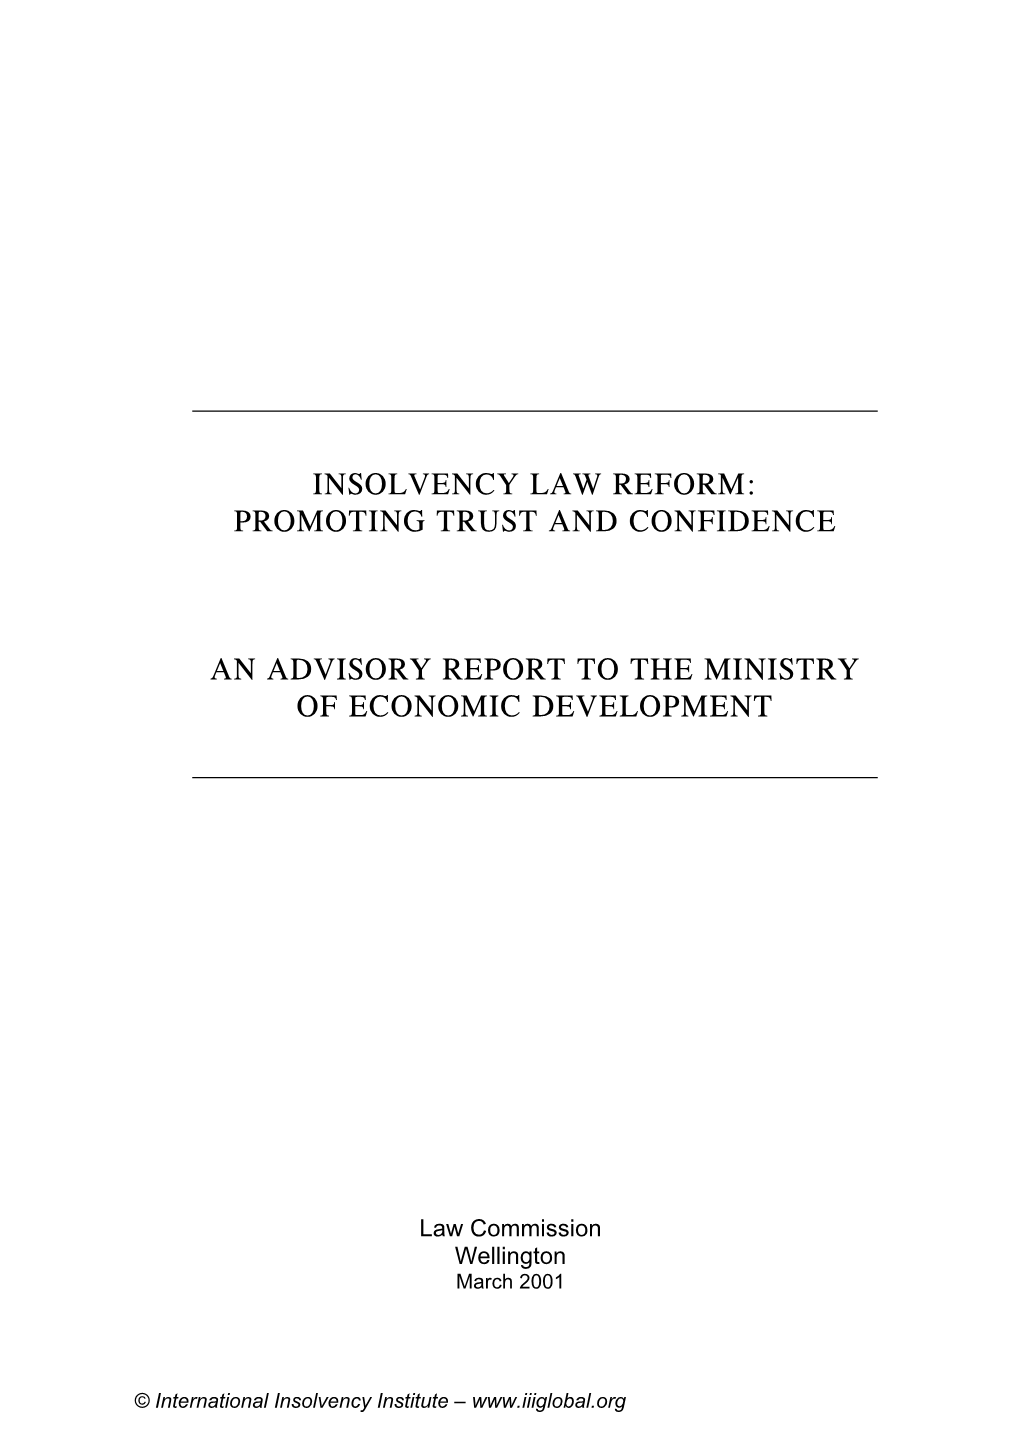 Insolvency Law Reform: Promoting Trust and Confidence